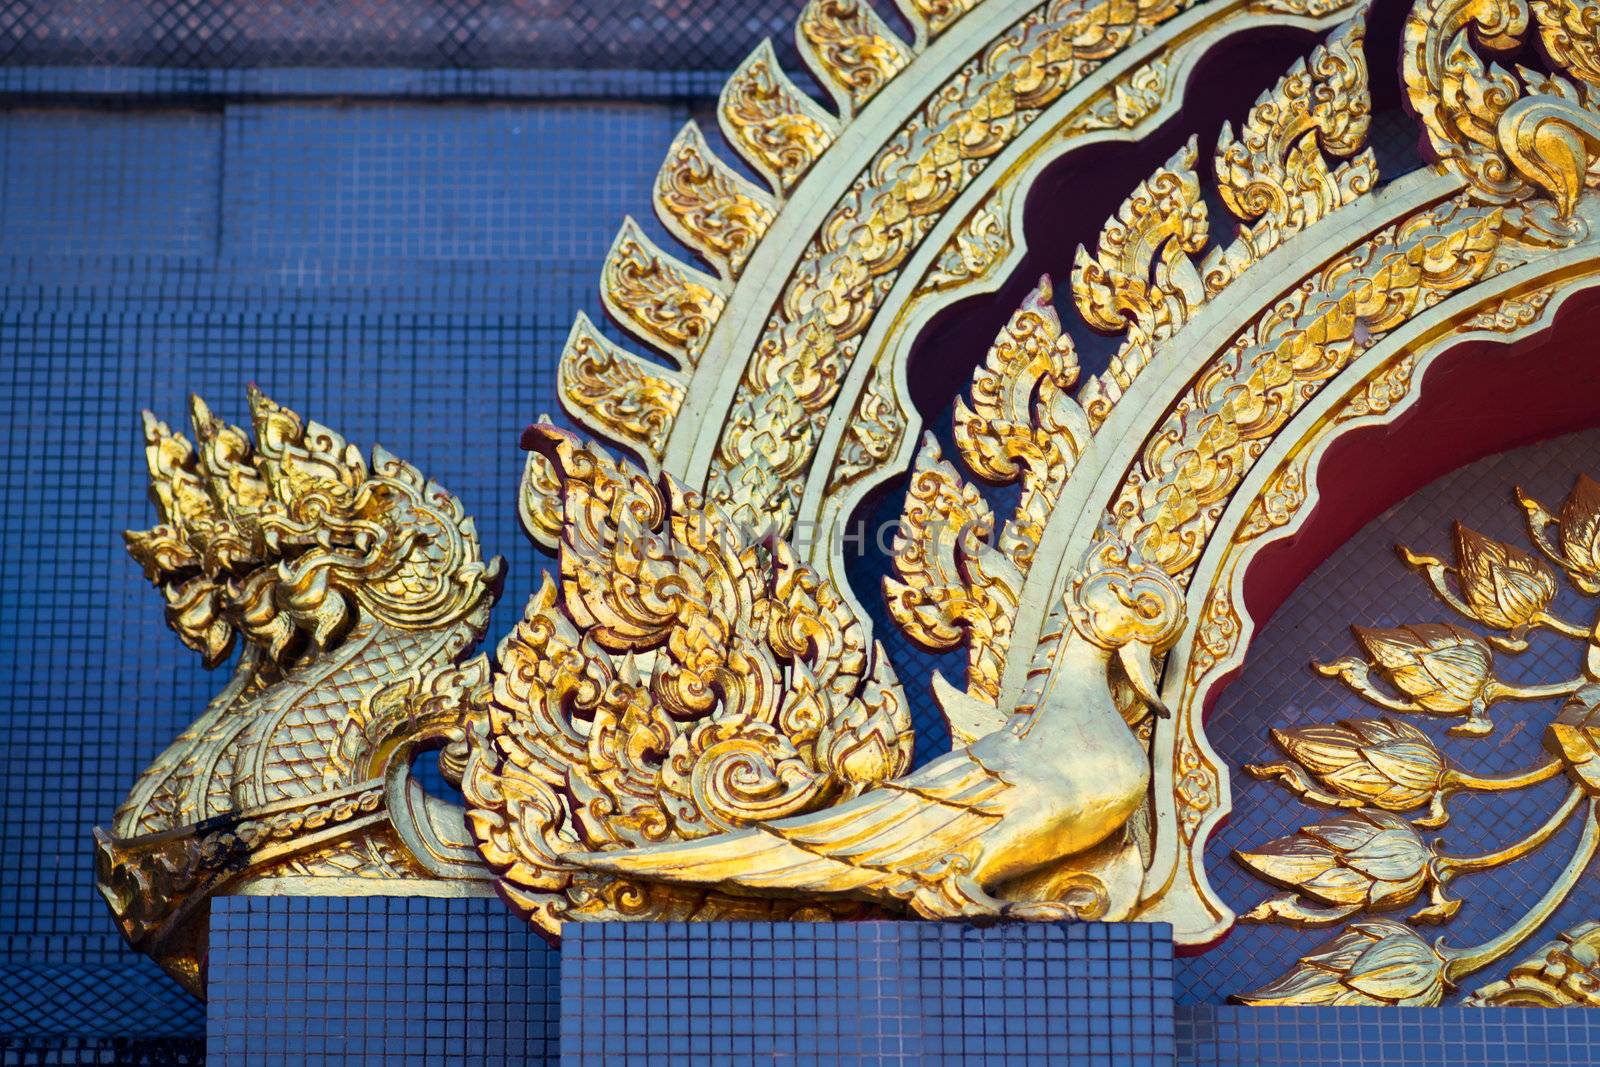 Decoration with golden dragons by timbrk